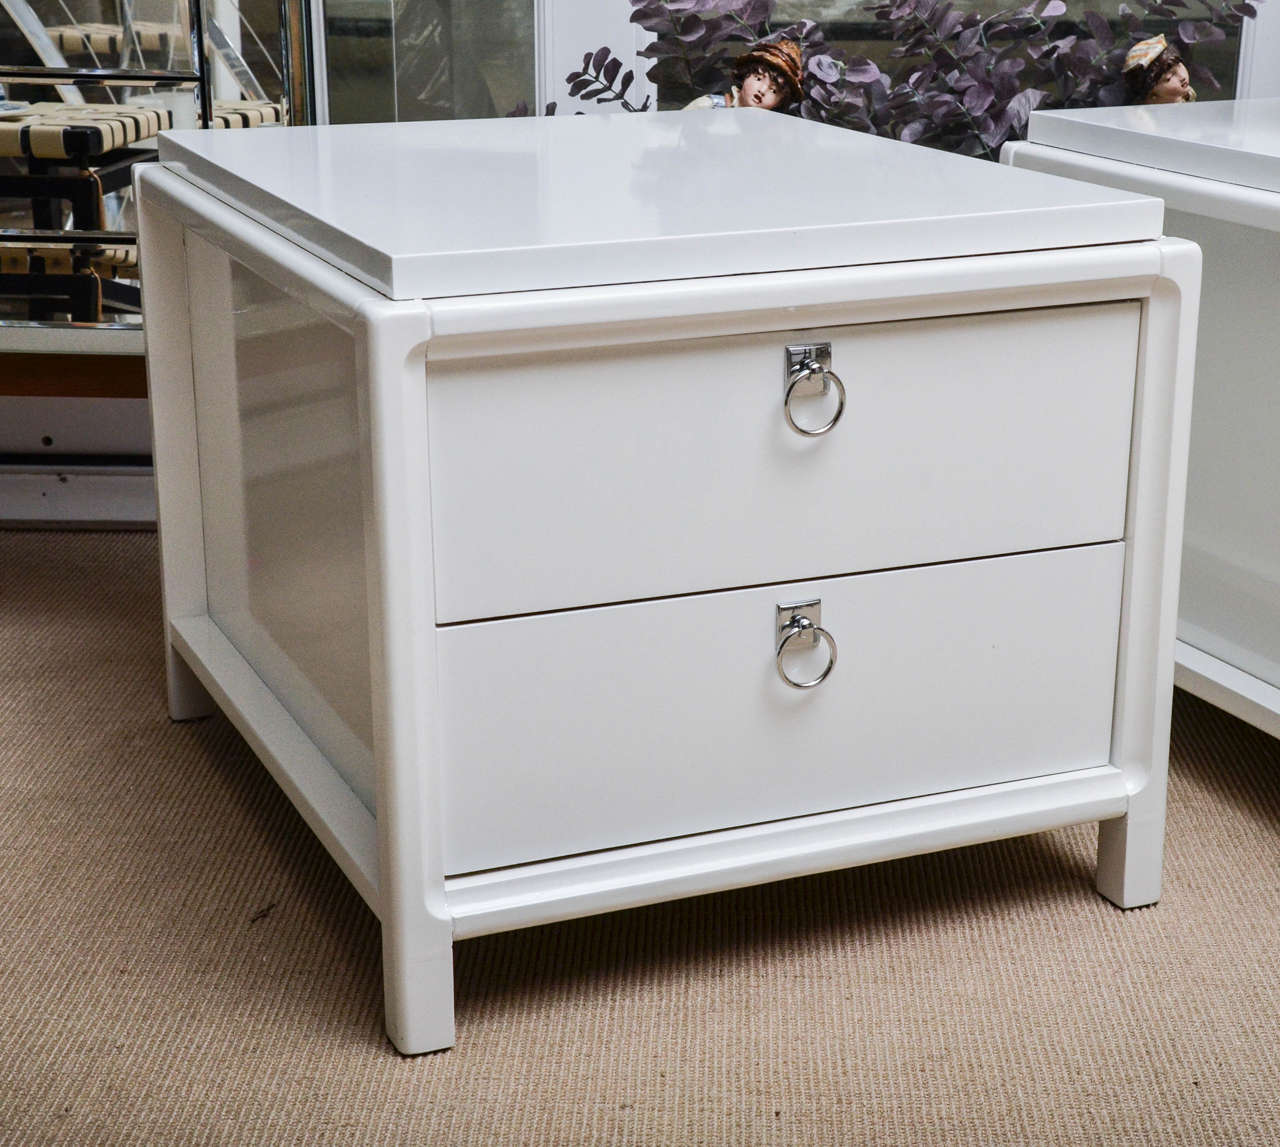 Pair of vintage white lacquer two-drawer nightstands with ring handles.